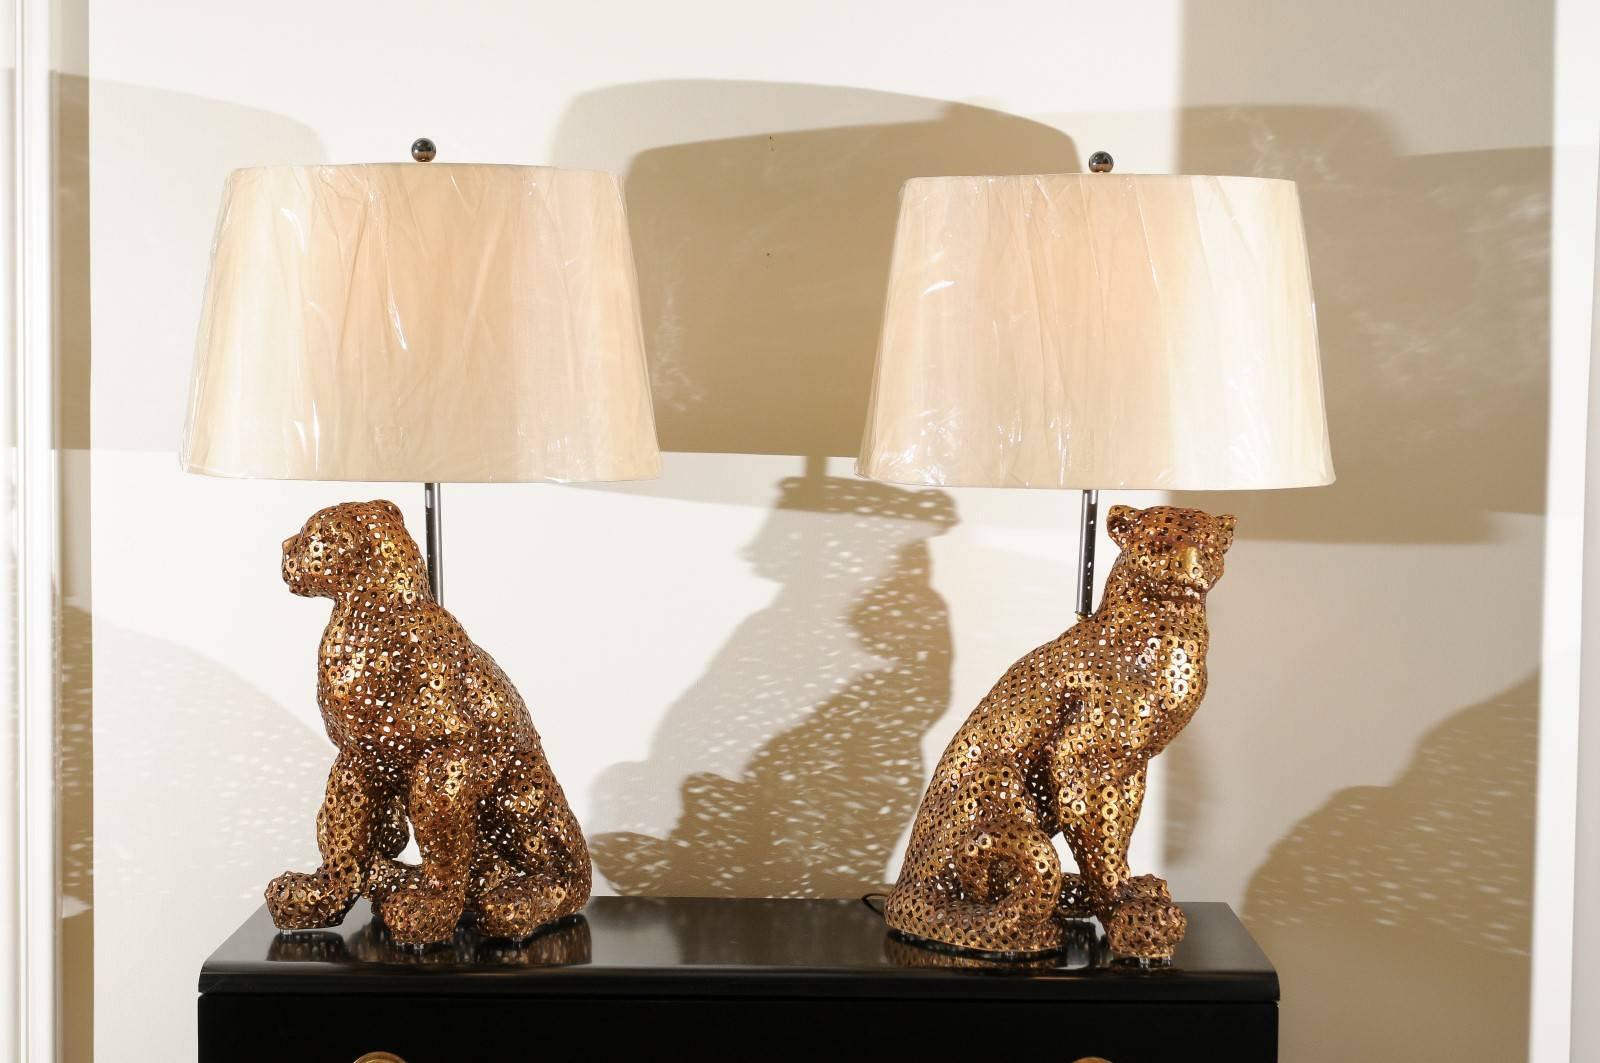 A mind-boggling pair of handmade panther sculptures as custom lamps, circa 1970. The figures are fashioned from individual common stock steel washers, painstakingly welded to form. Fabulous dull gold finish aged to absolute perfection. Exquisite